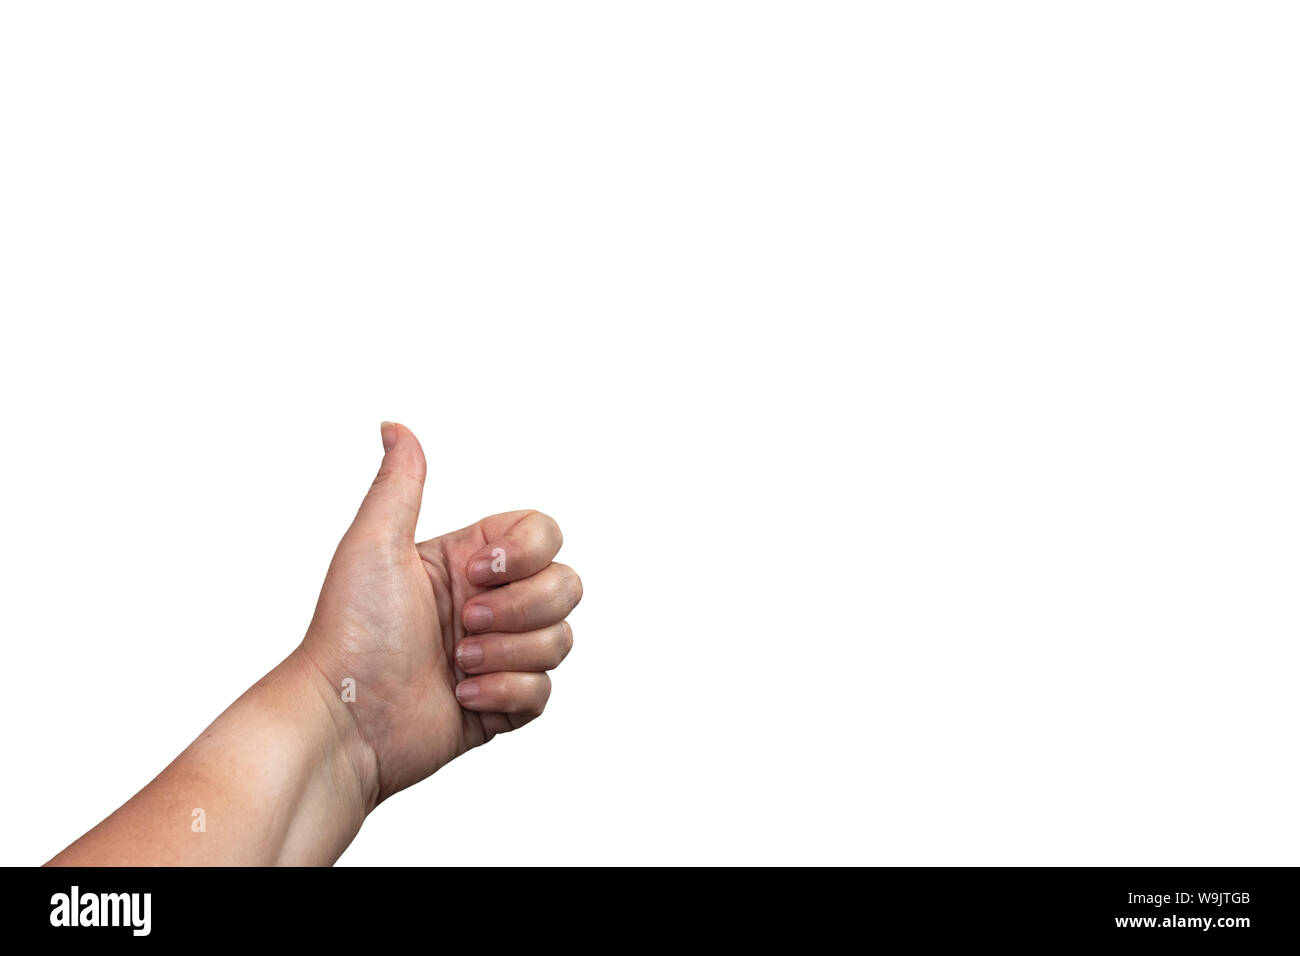 A single white hand giving the thumbs up gesture set against a white background Stock Photo